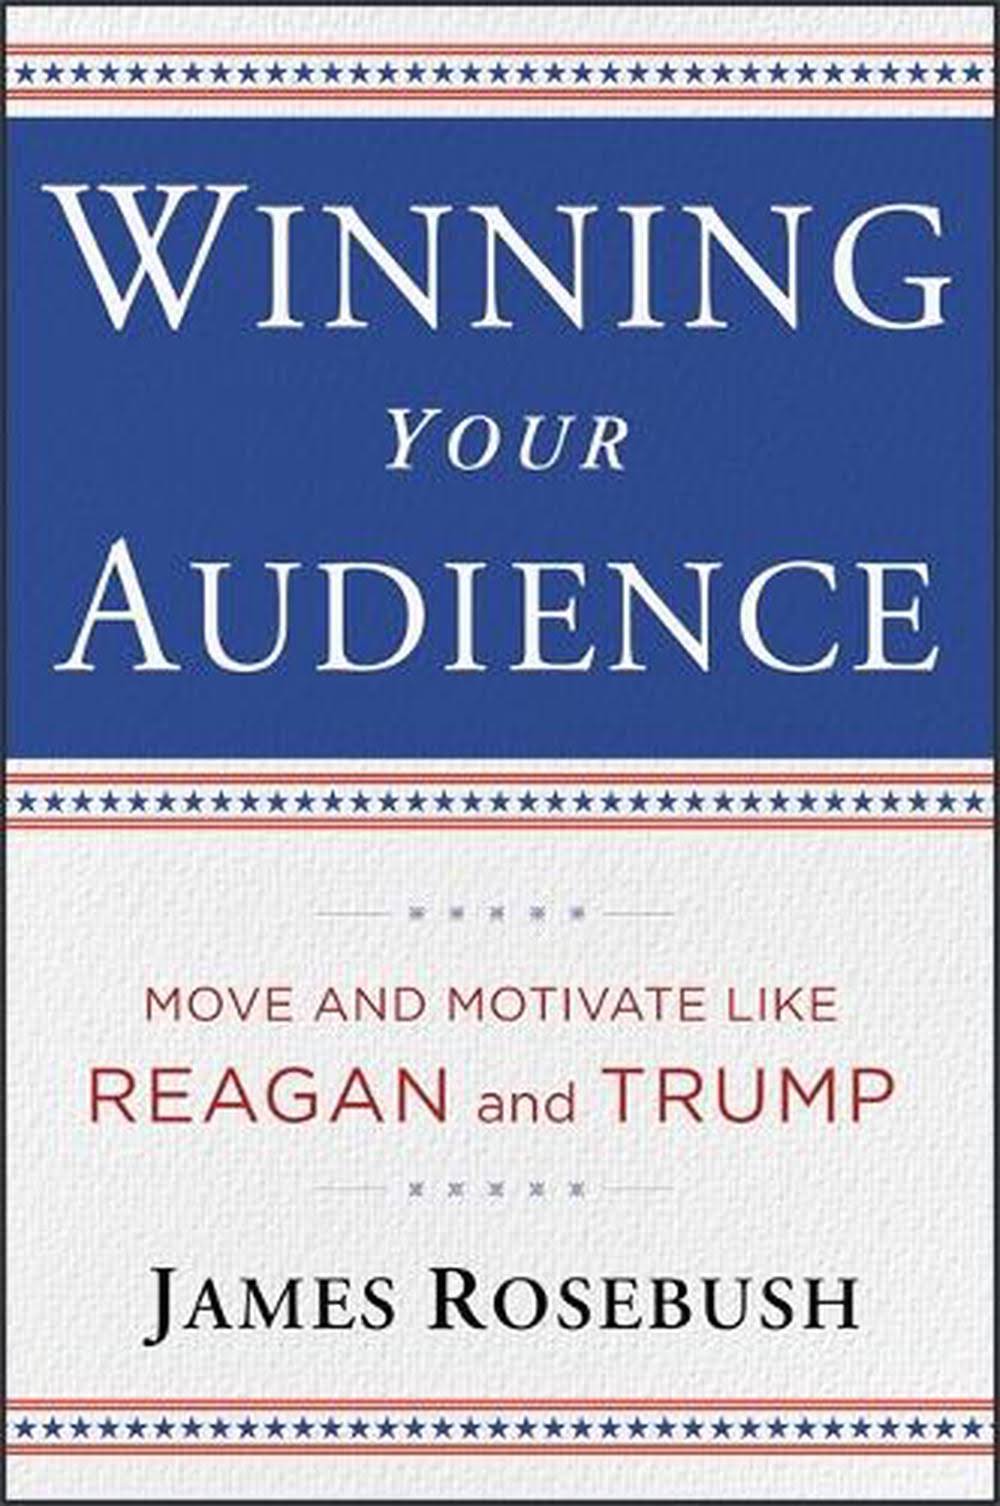 Winning Your Audience by James Rosebush